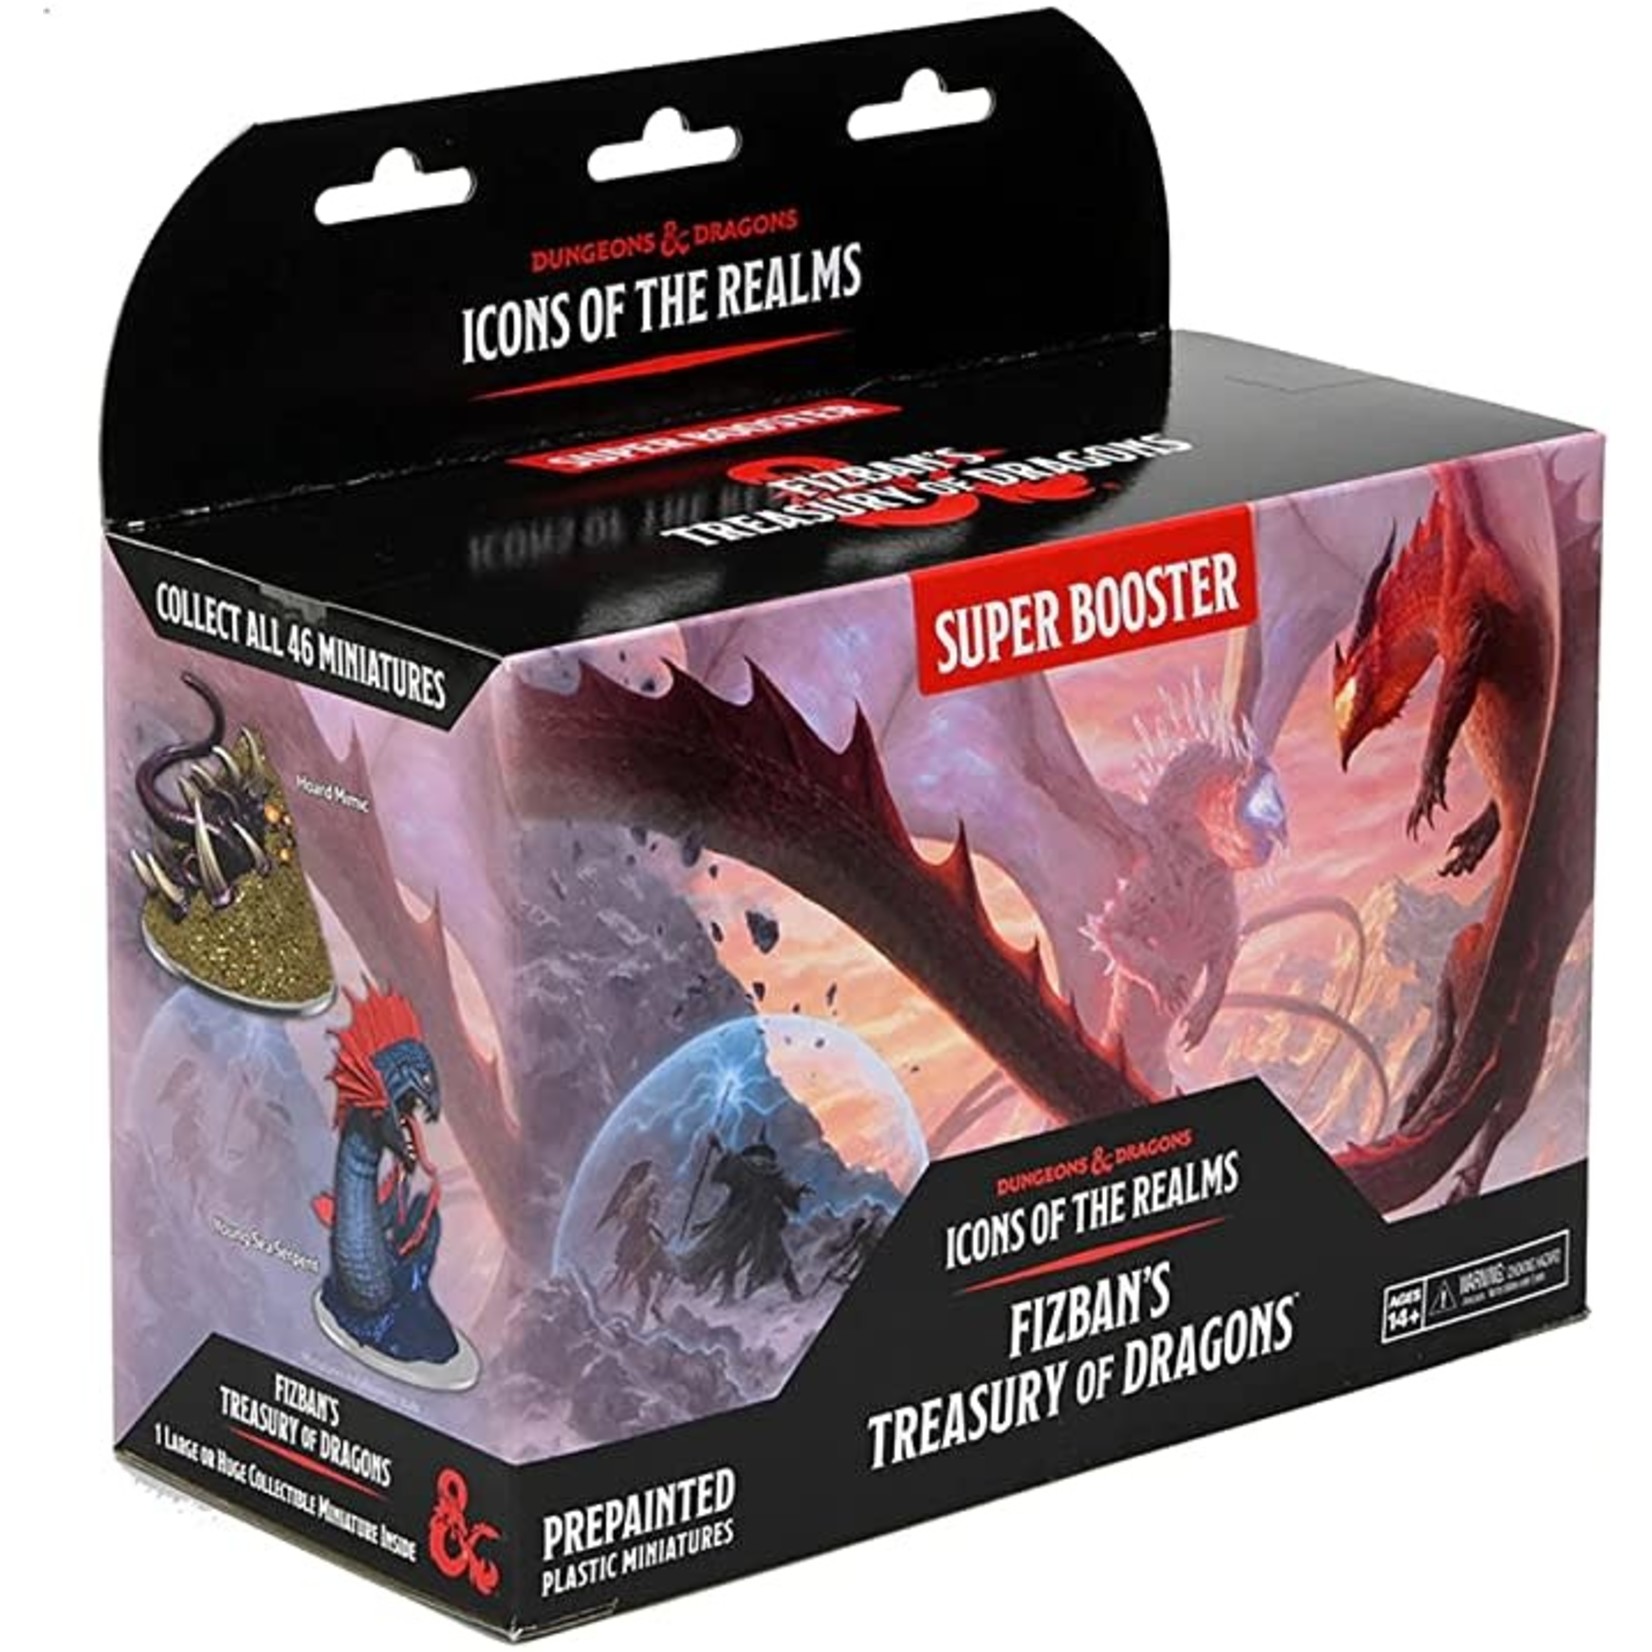 Wizards of the Coast D&D Icons of the Realms SUPER BOOSTER Fizban's Treasury of Dragons Booster Pack